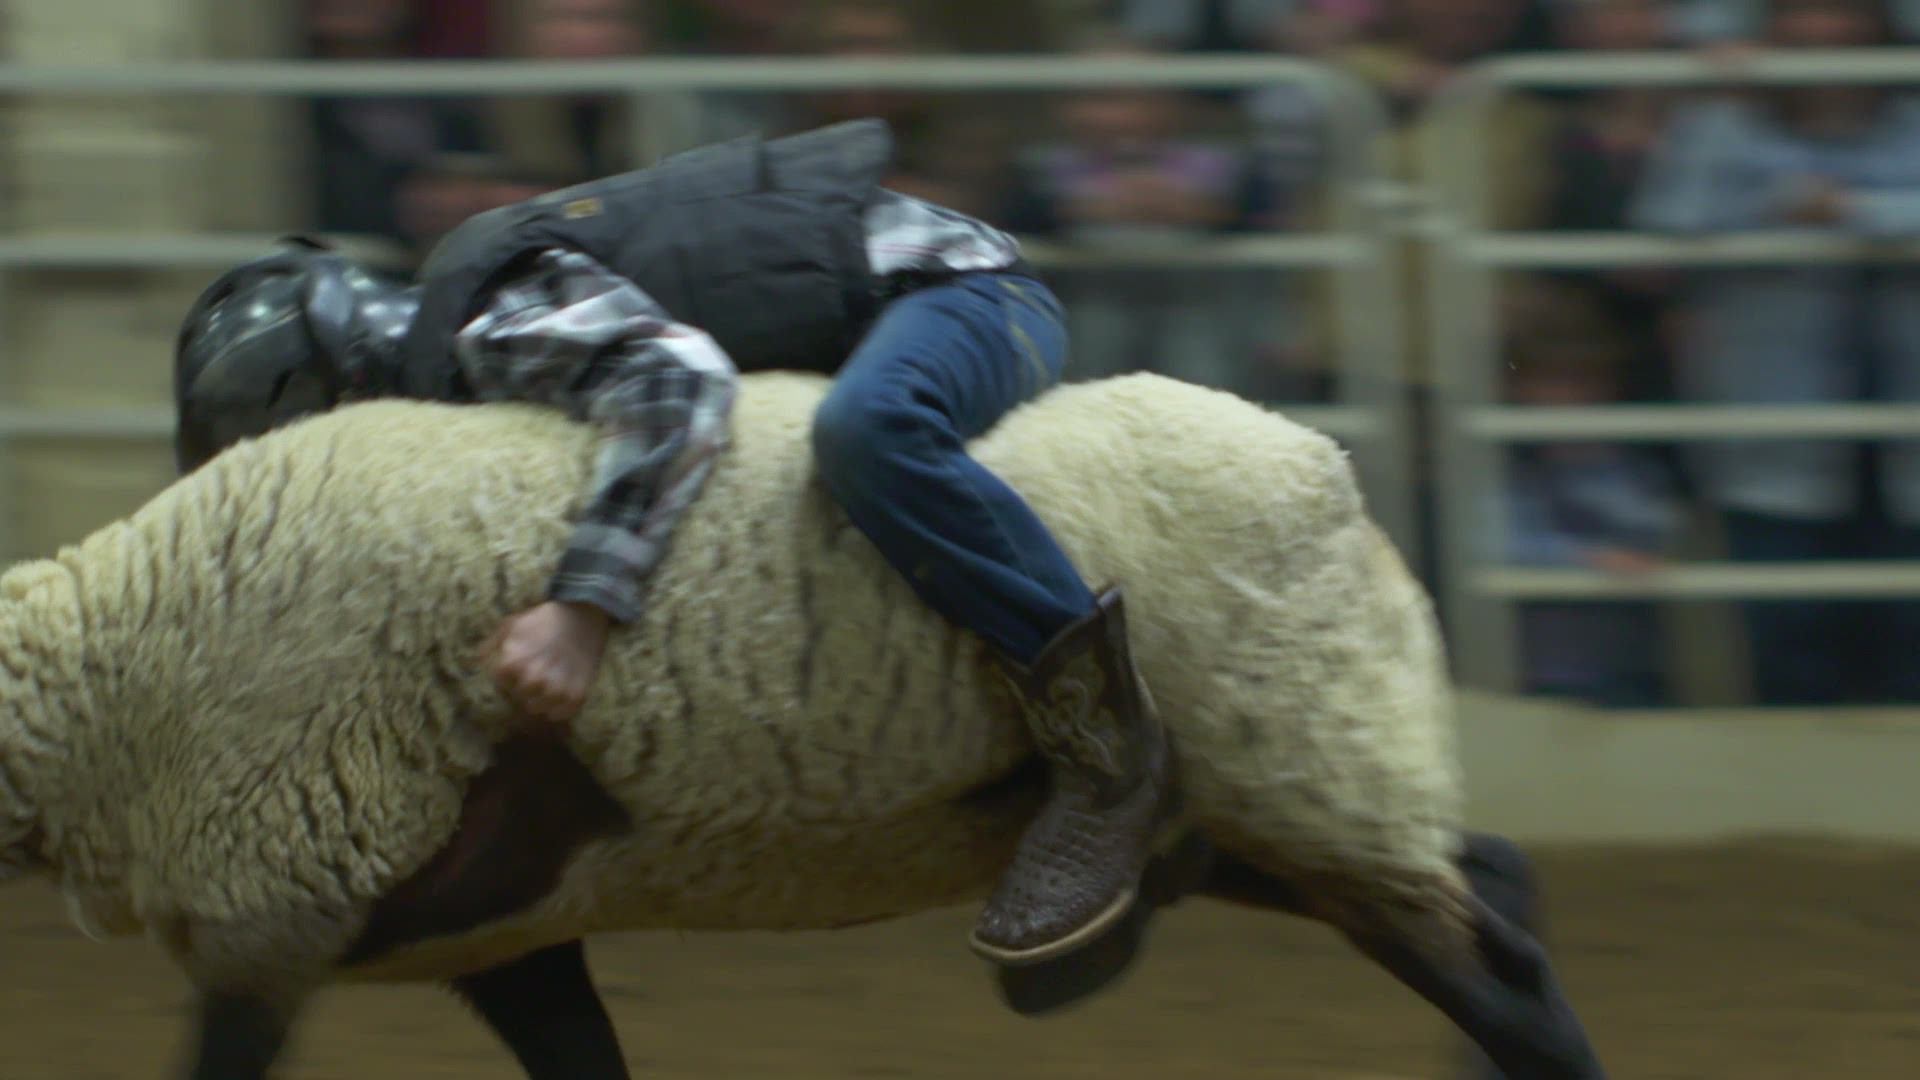 Children ages 5-7 ride sheep at the Mutton Bustin' event at the 2020 National Western Stock Show.